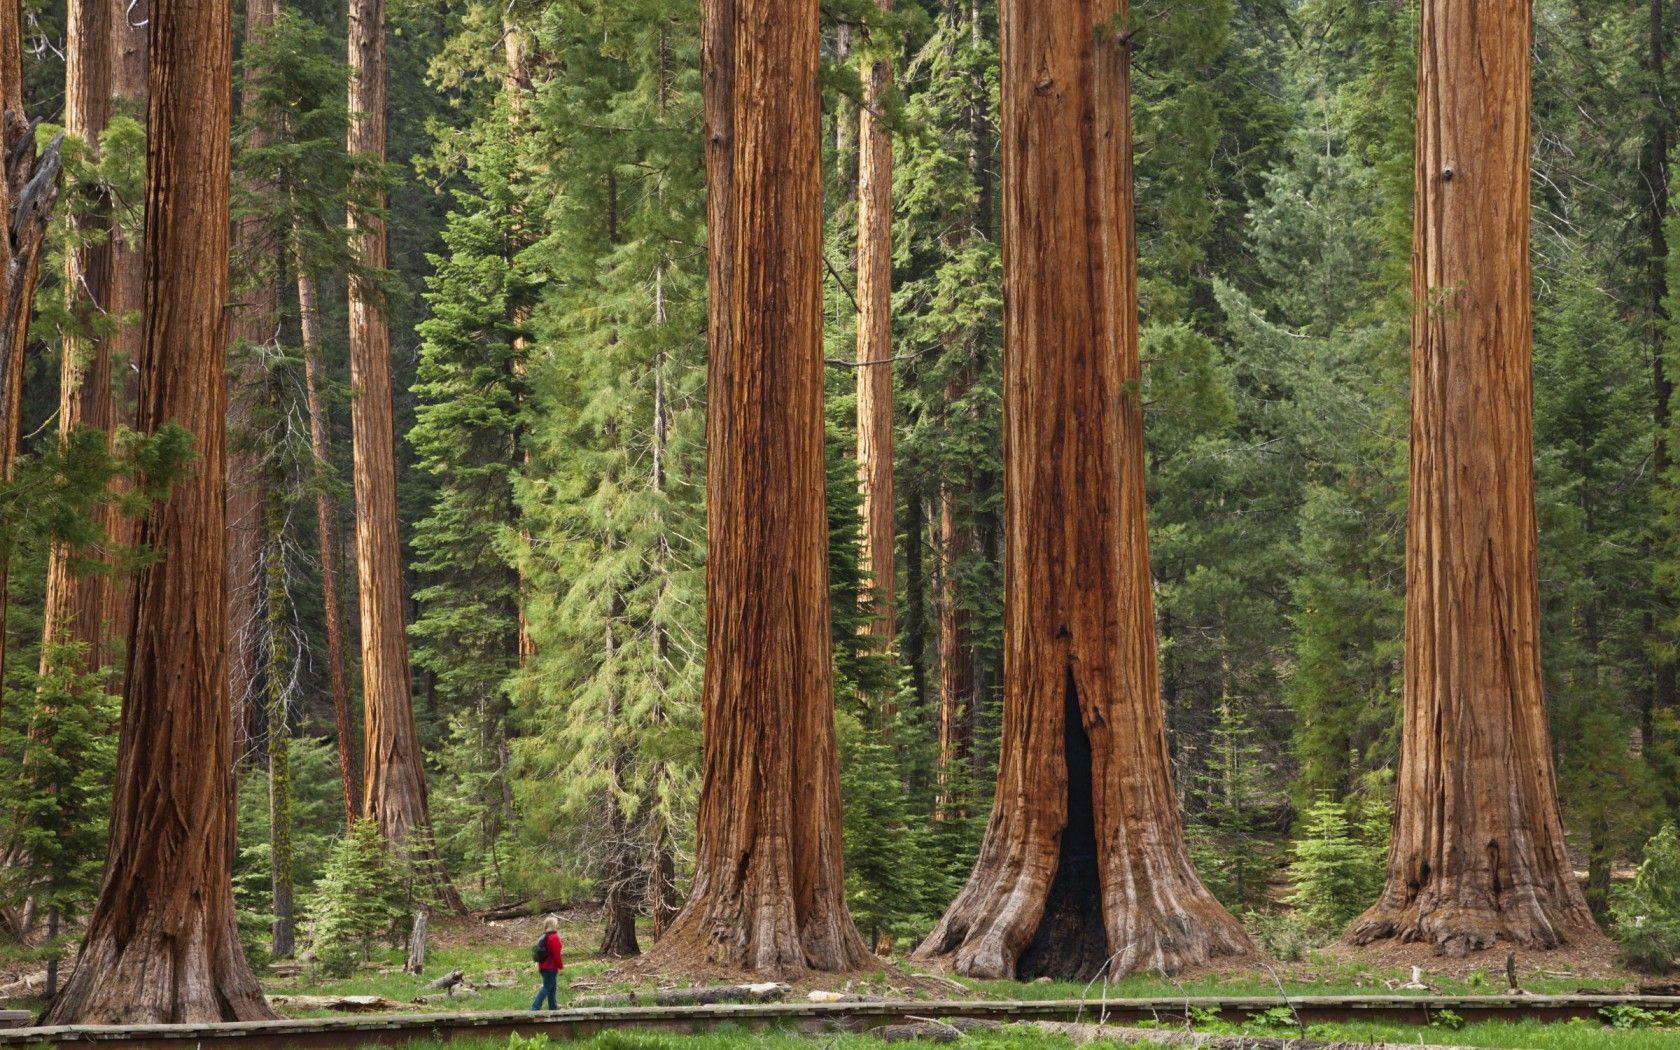 The 40 most stunning national parks in America. Sequoia national